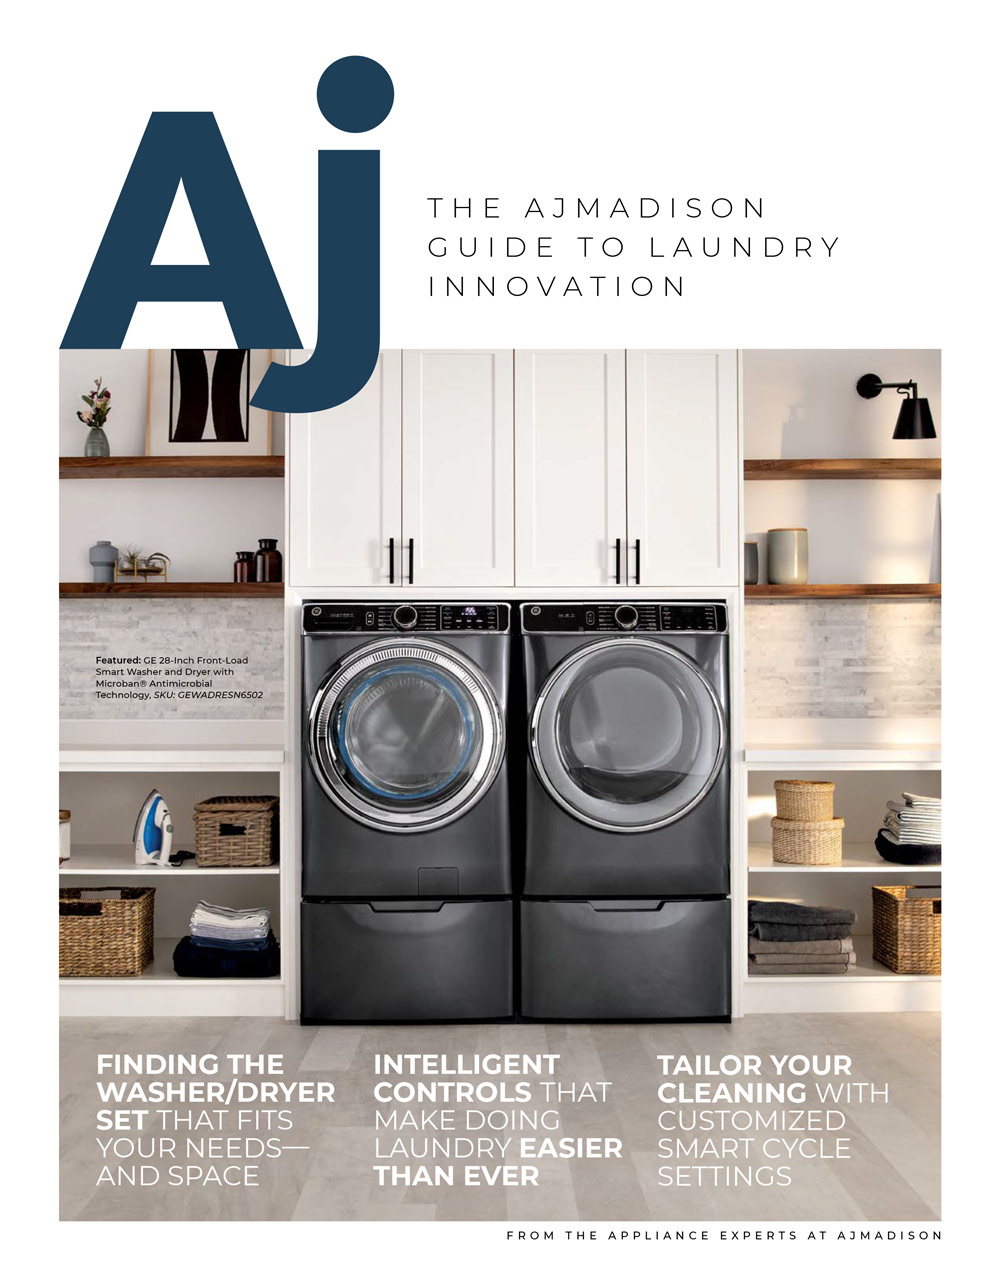 AJMadison Guide to Laundry Innovation cover